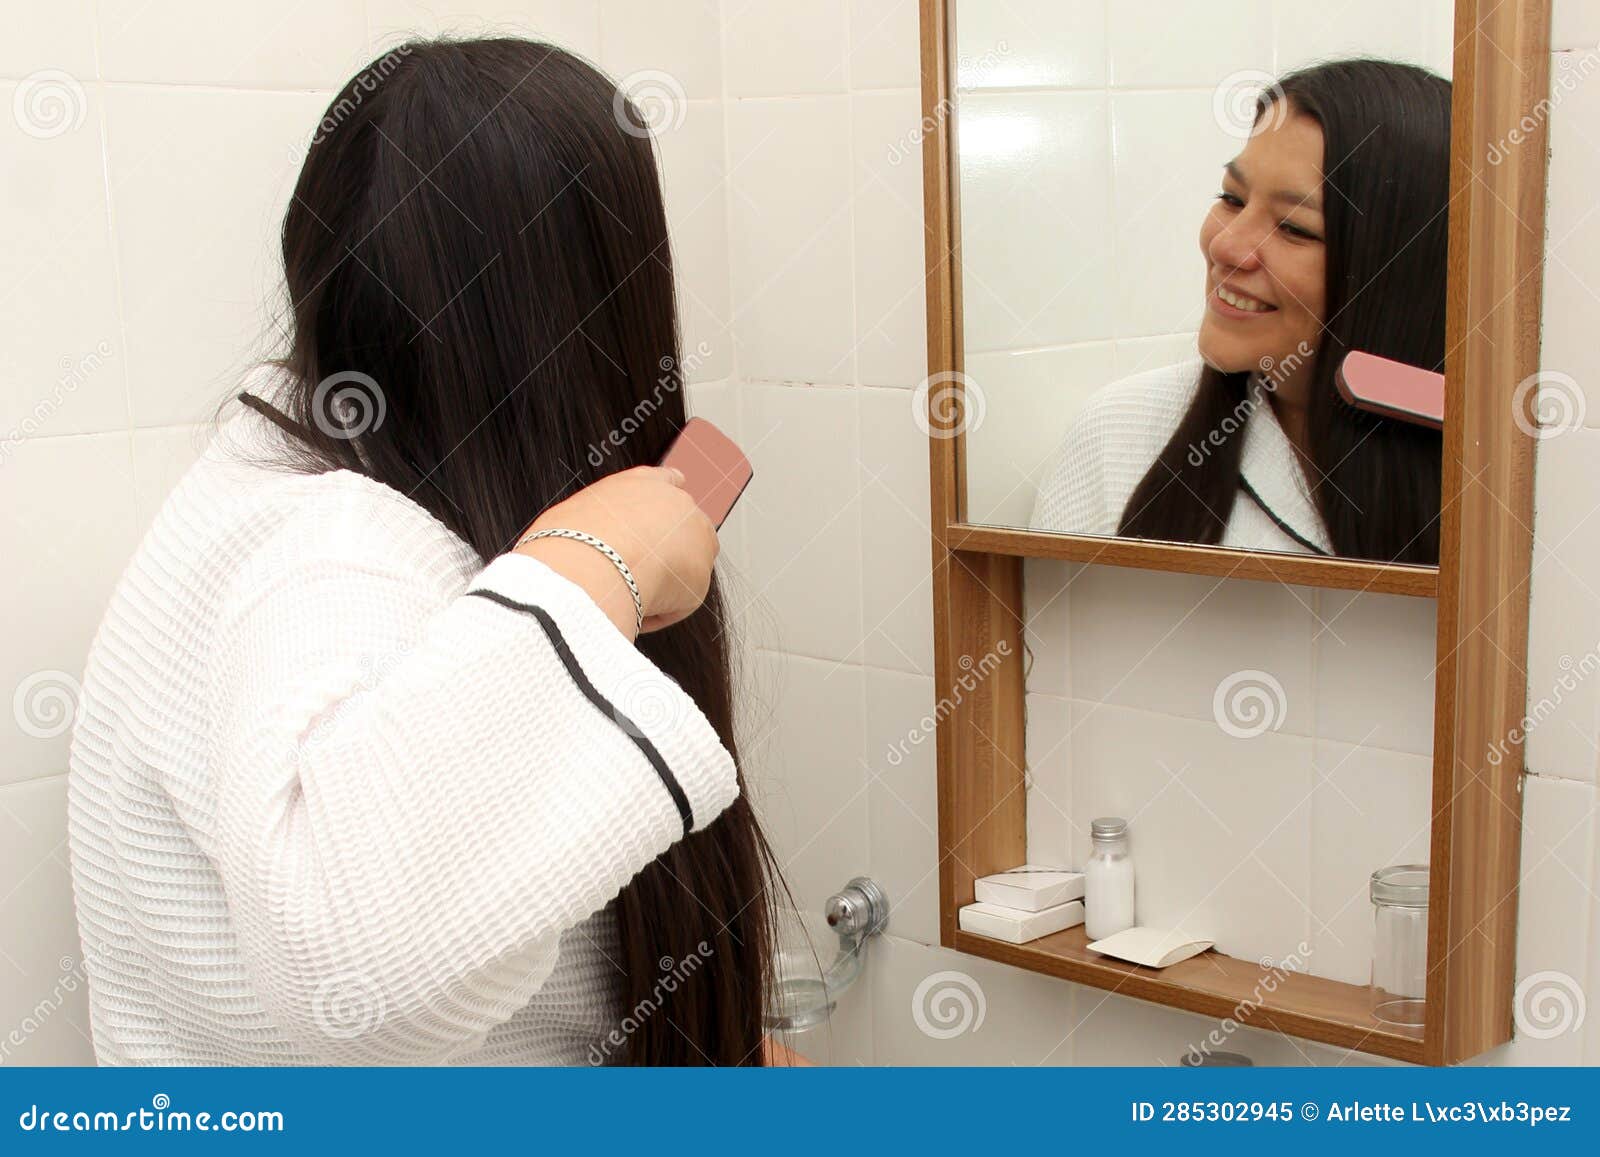 40 Year Old Latina Woman Cares And Brushes Hair In The Bathroom In A